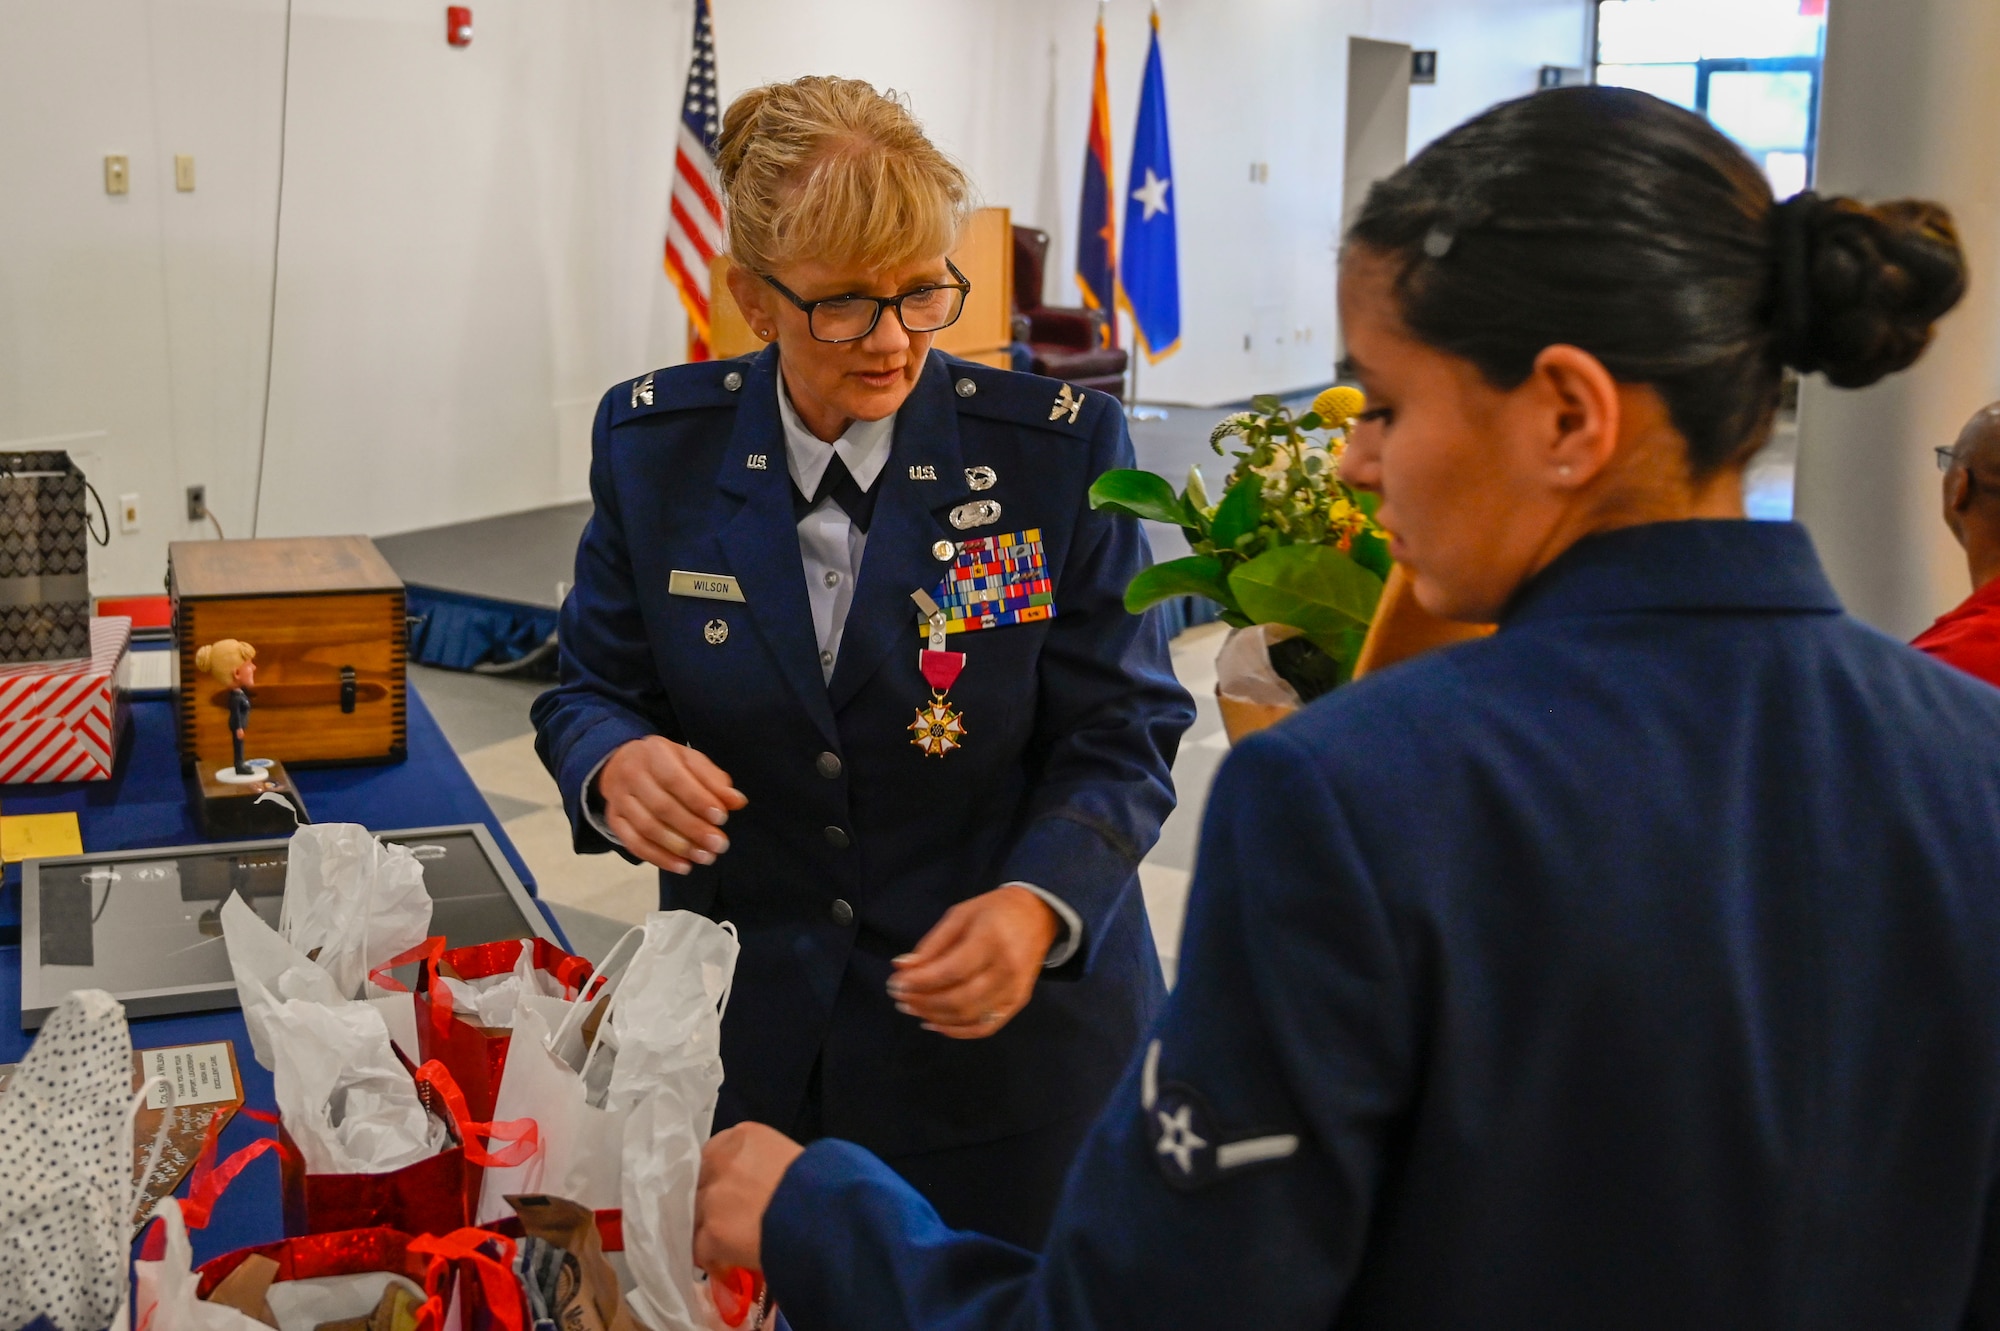 U.S Air Force Col. Sandra L. Wilson, Vice Commander of the 162nd Wing, prepares to hand out gifts during her retirement ceremony at Morris Air National Guard Base, May 14, 2022. (Air National Guard photo by Senior Master Sgt. Charles Givens)